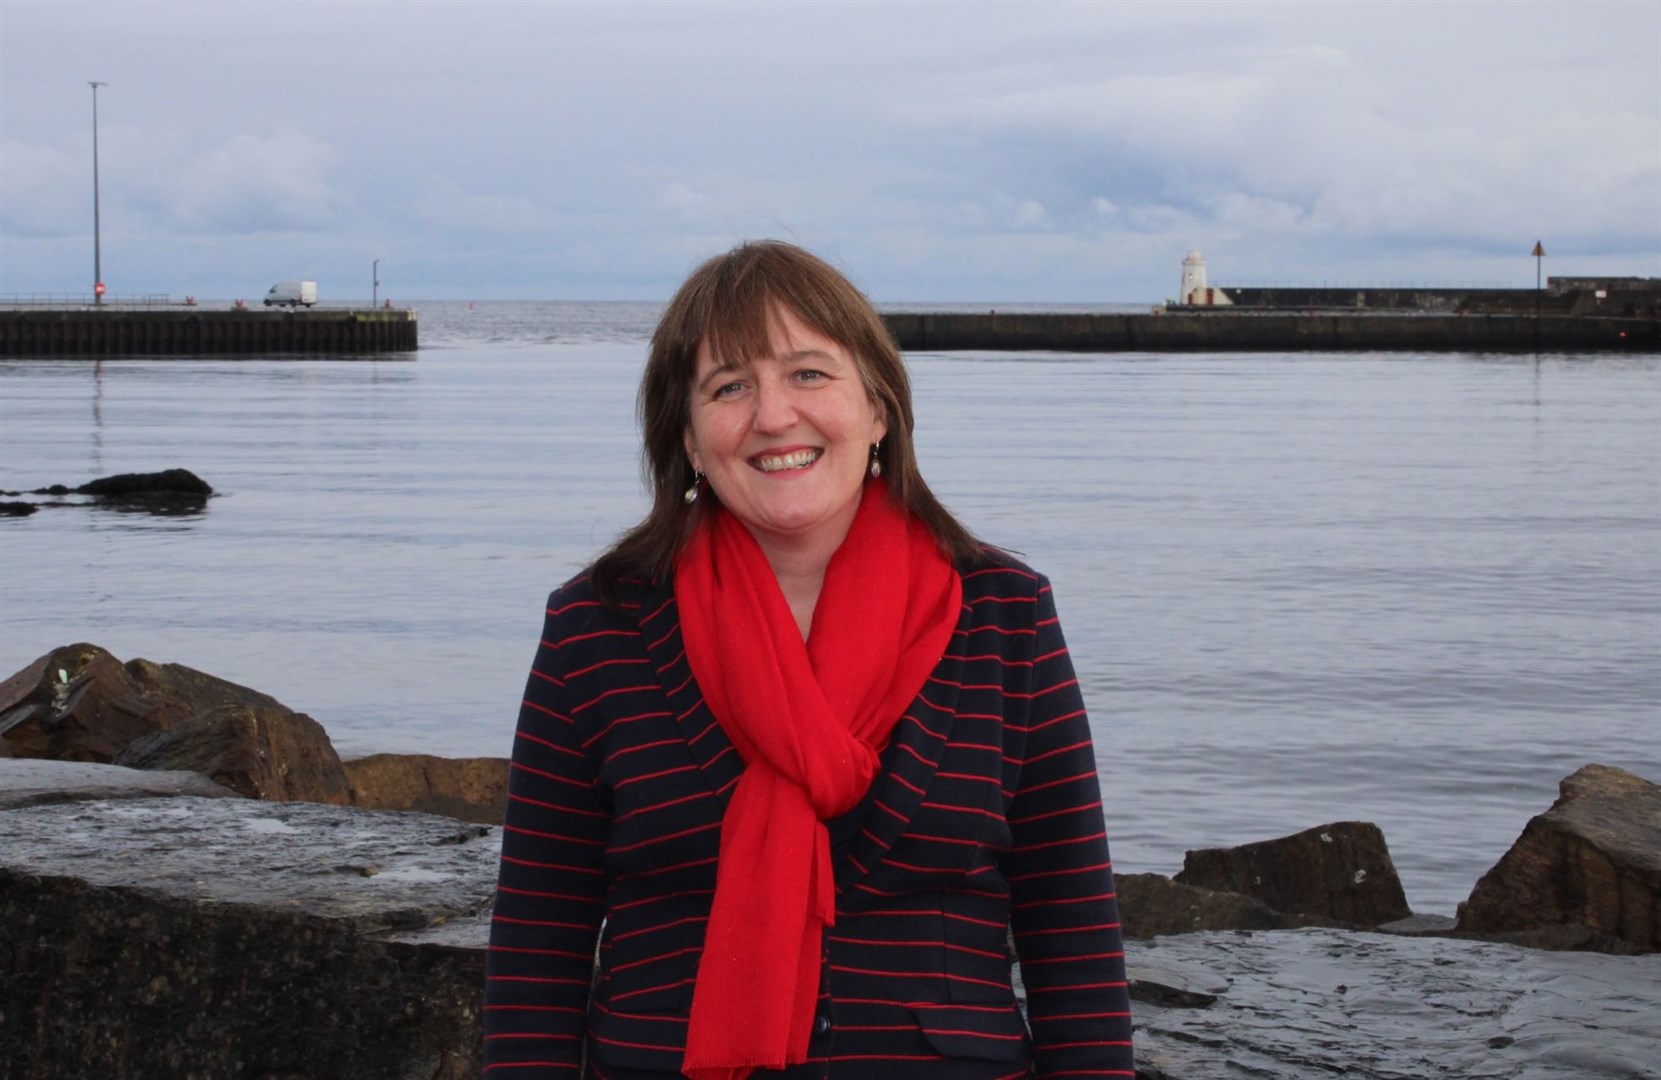 Maree Todd MSP: 'In the Scottish context, green ports will accelerate decarbonisation, create fair work opportunities and offer great community benefits to the areas in which they are based'.